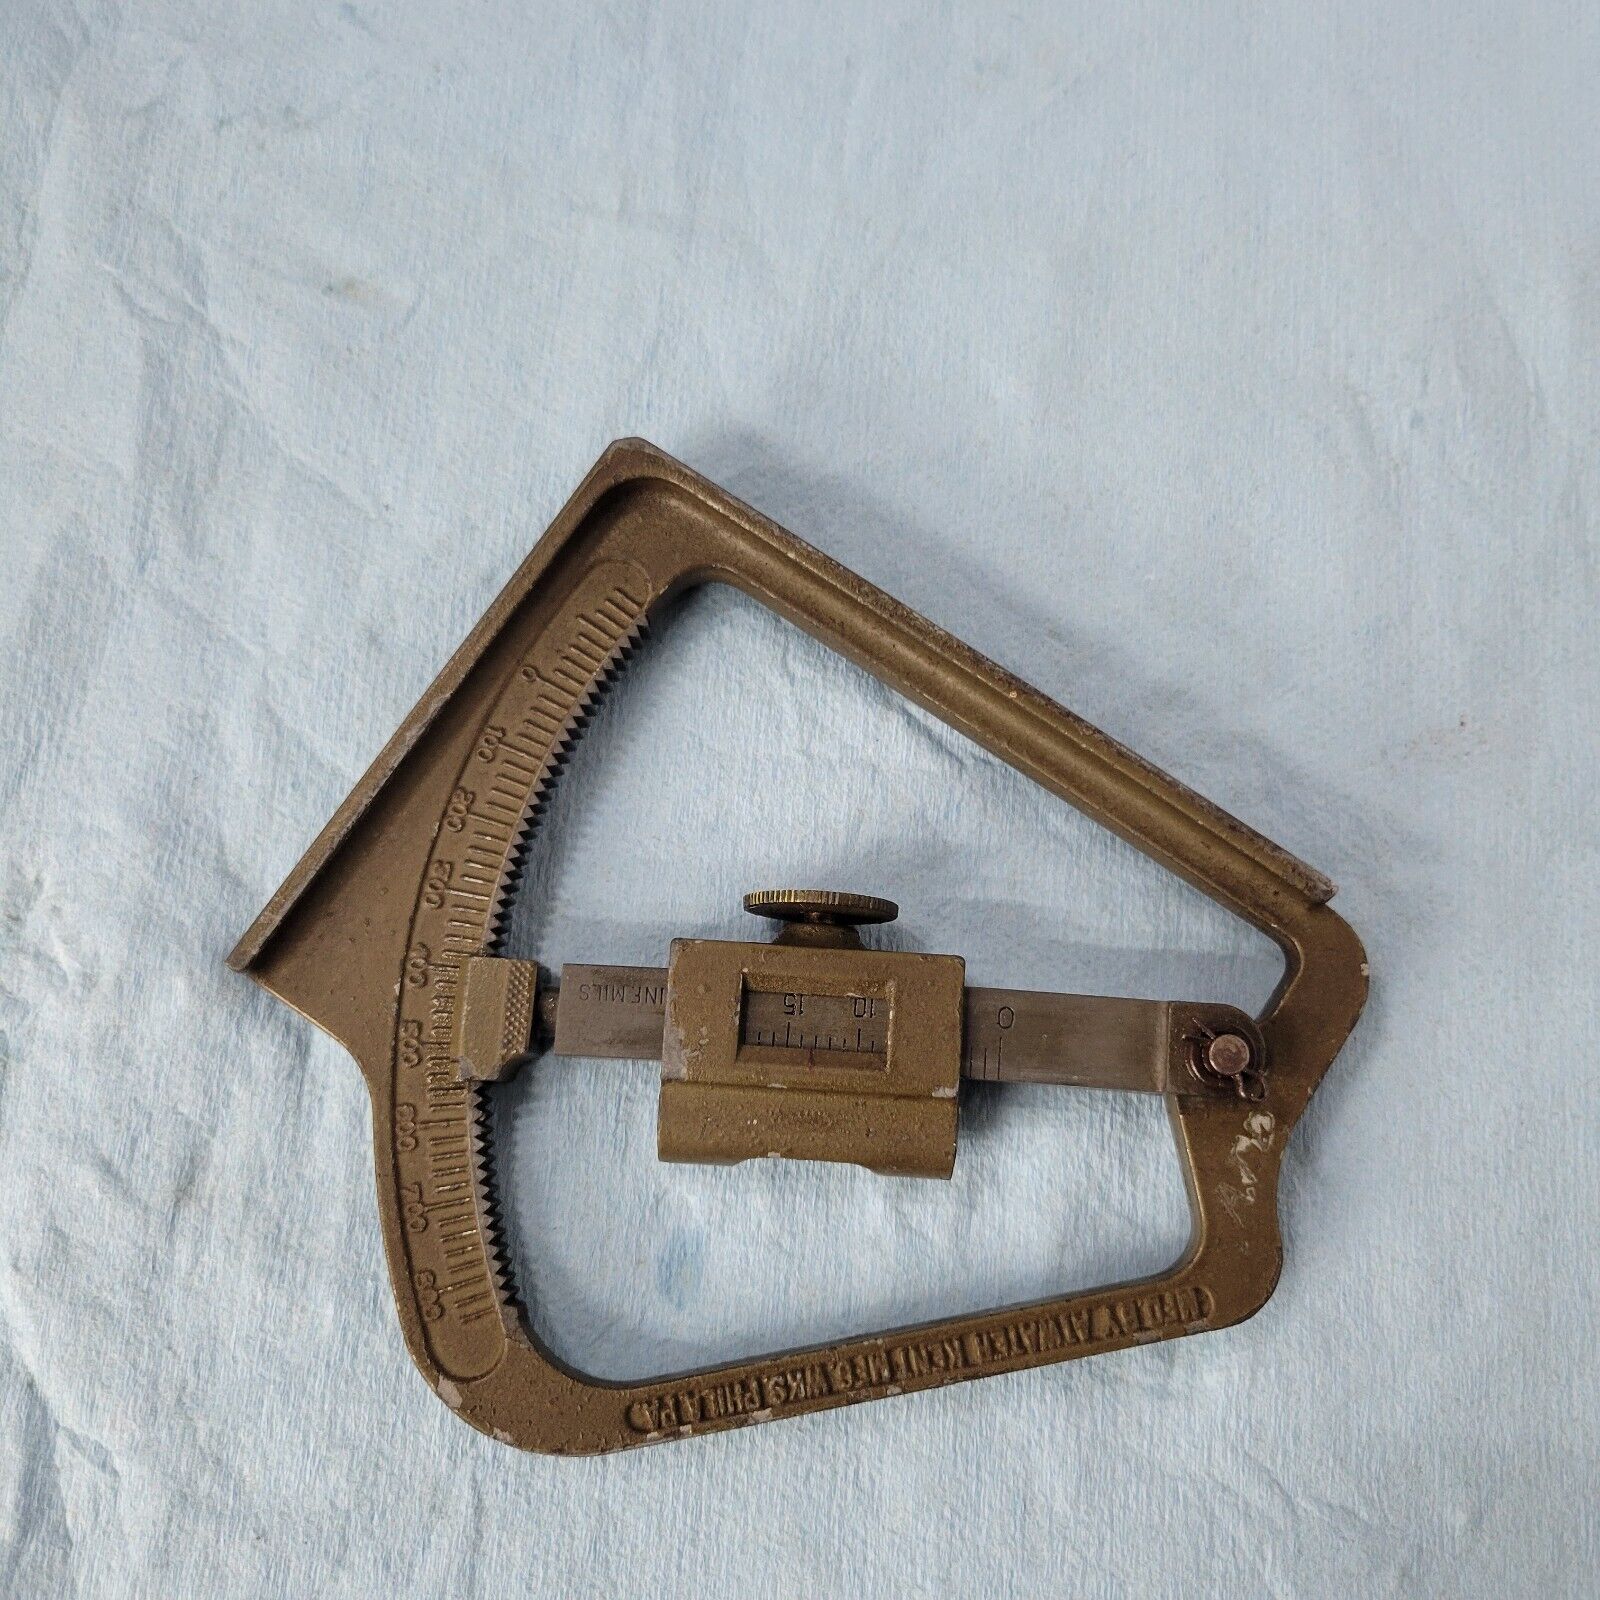 Vintage WWll Machine Gun Clinometer Model 1917, Tested for Functionality